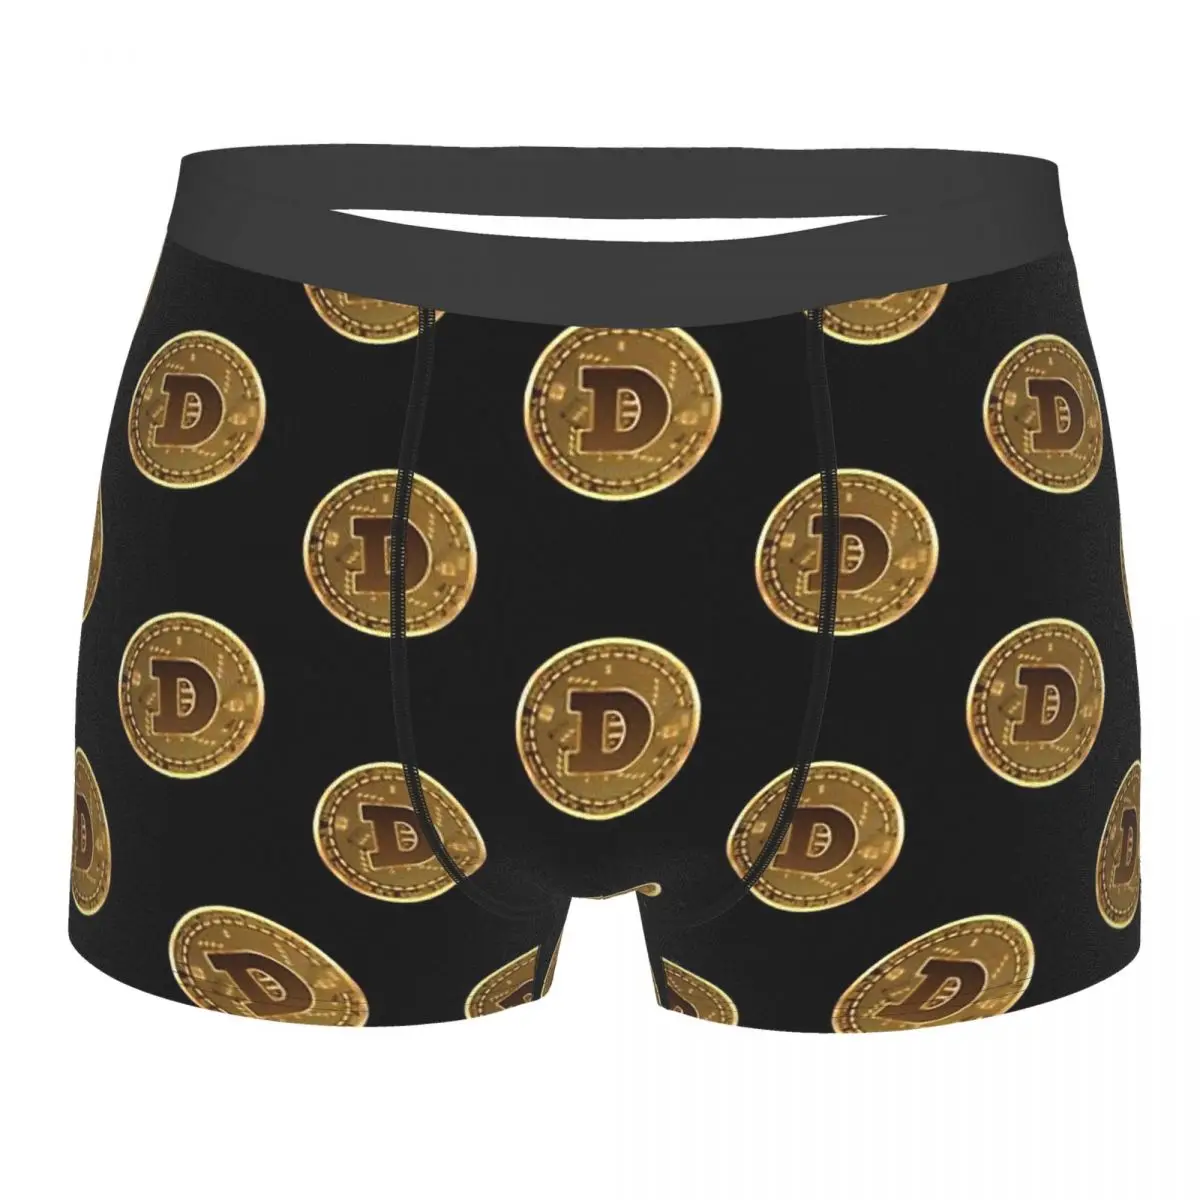 

Dogecoin Cryptocurrency Doge Coin Underpants Cotton Panties Male Underwear Ventilate Shorts Boxer Briefs